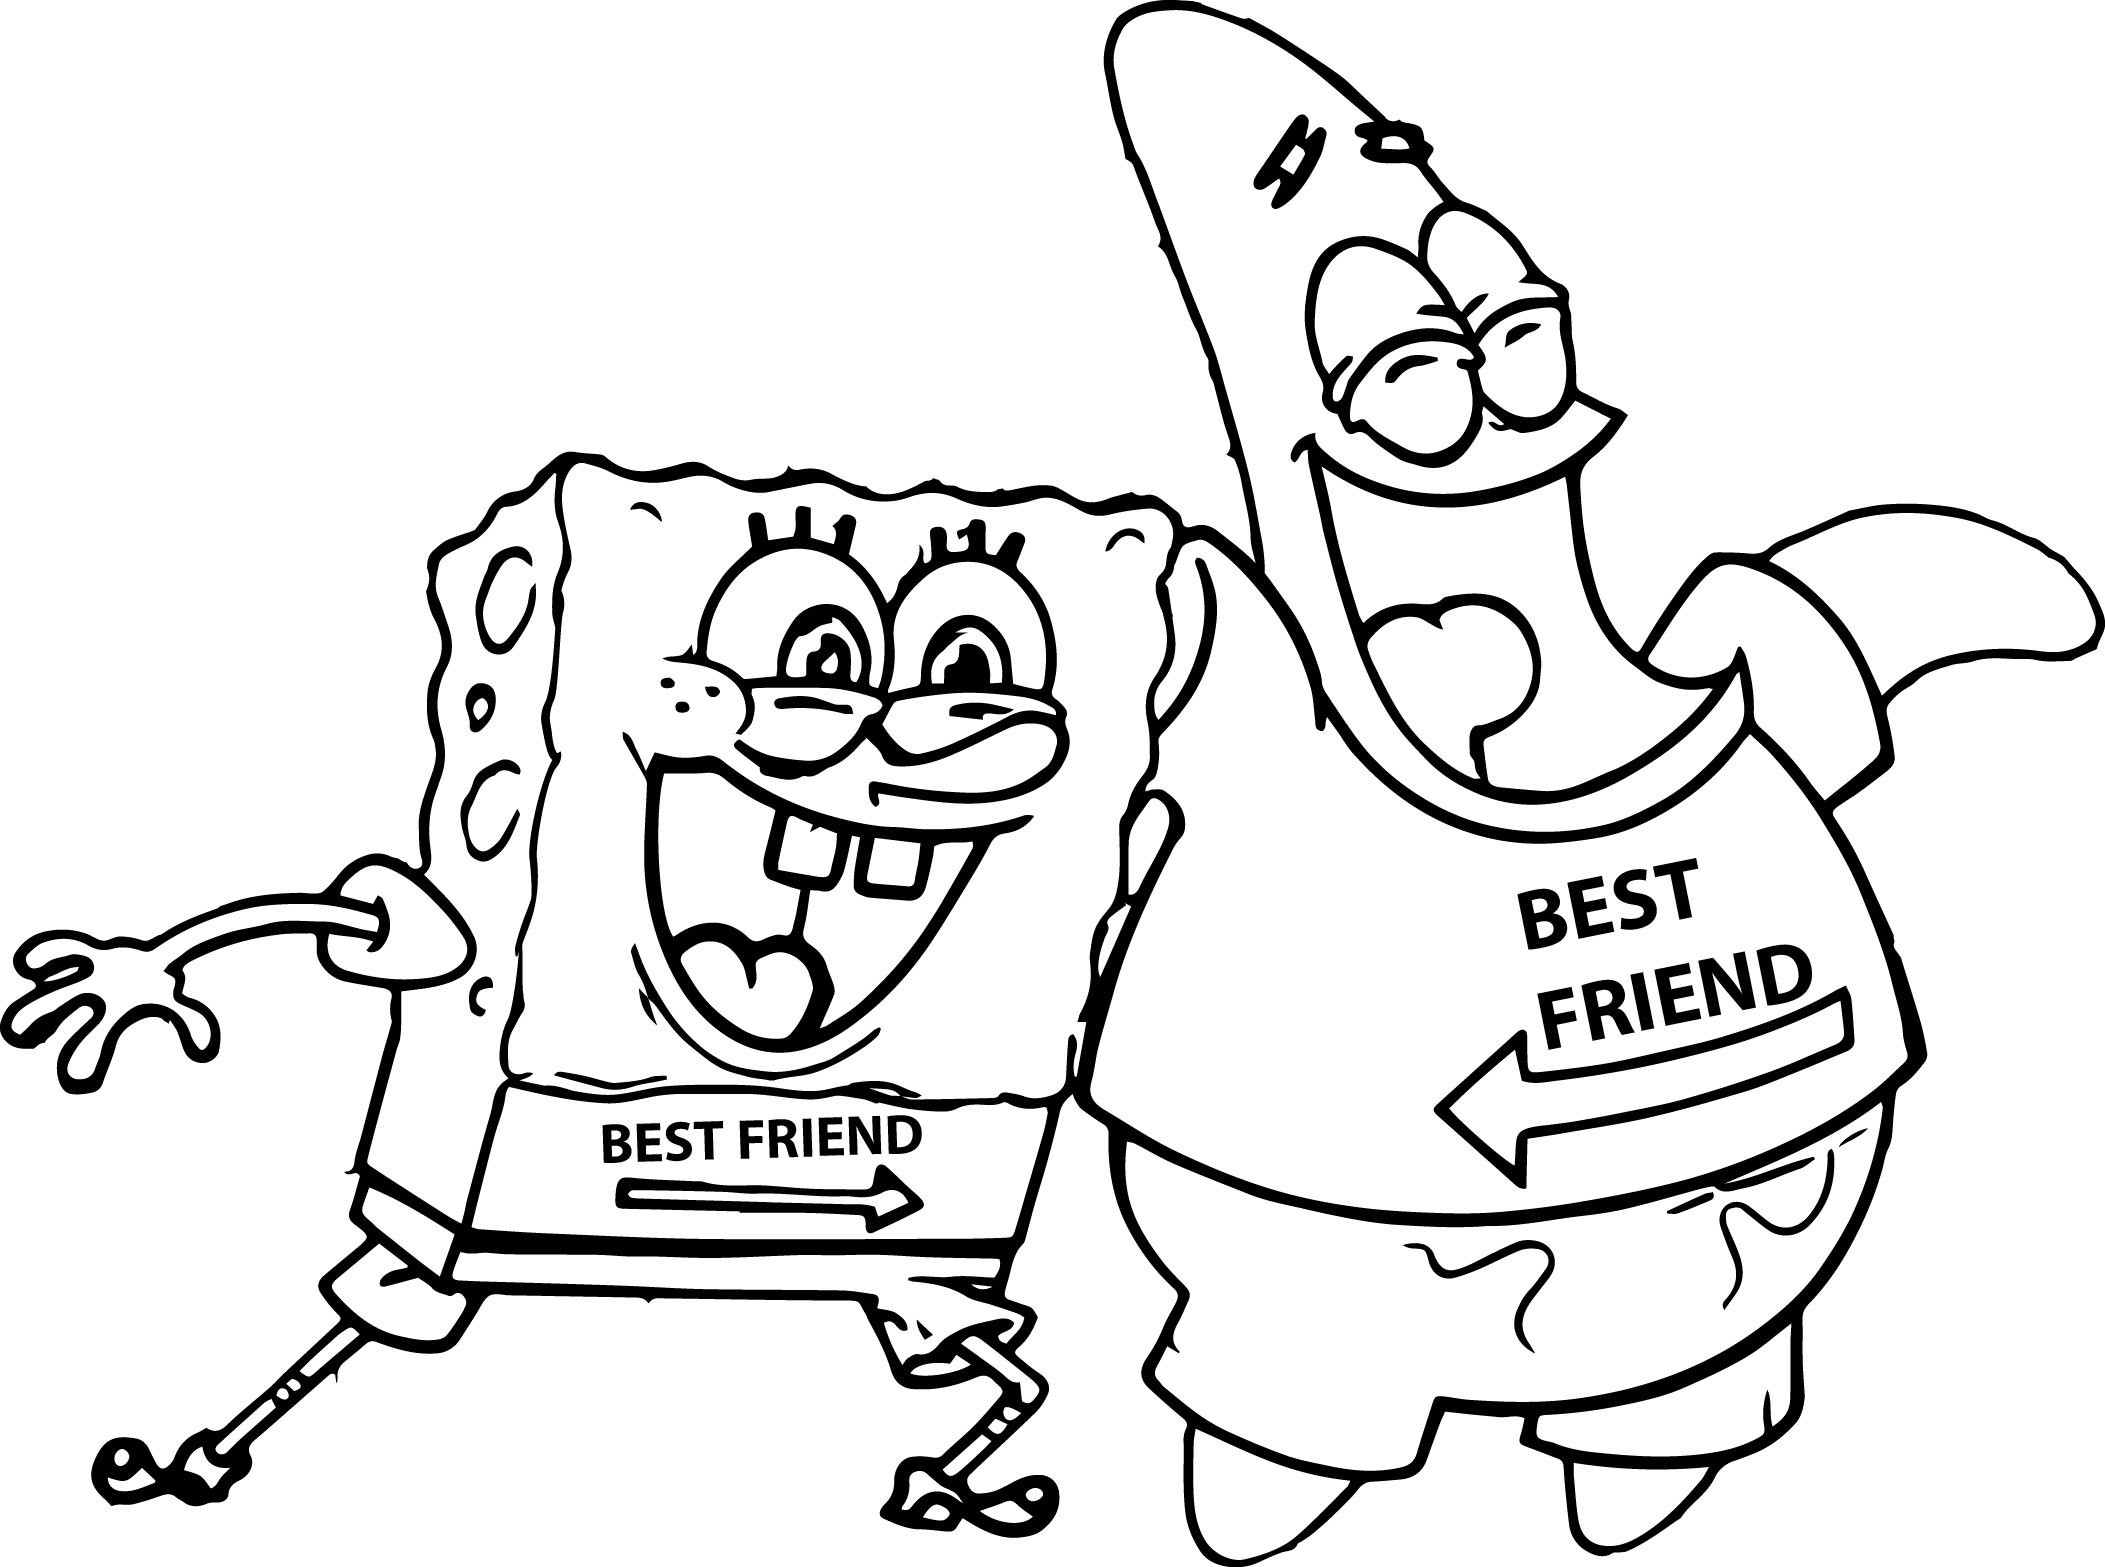 free coloring pages Exciting Spongebob Squarepants And Patrick Coloring Pages New 59 of Spongebob